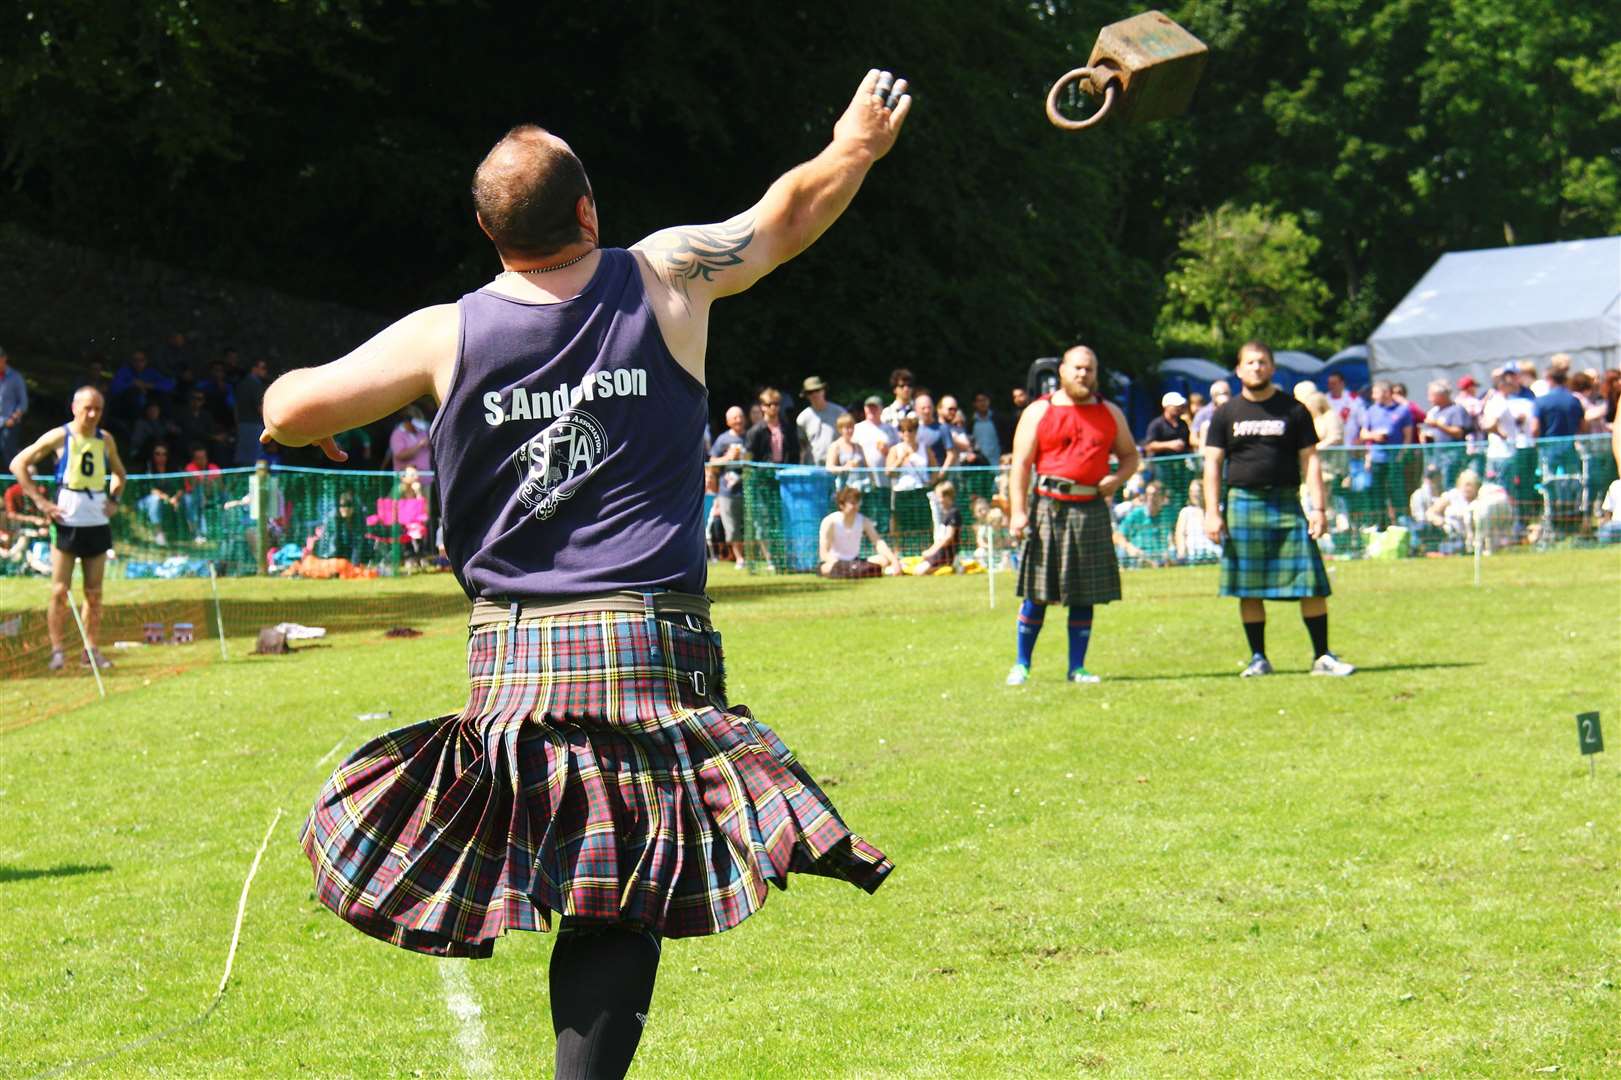 highland-games-will-be-back-stronger-than-ever-says-official-after